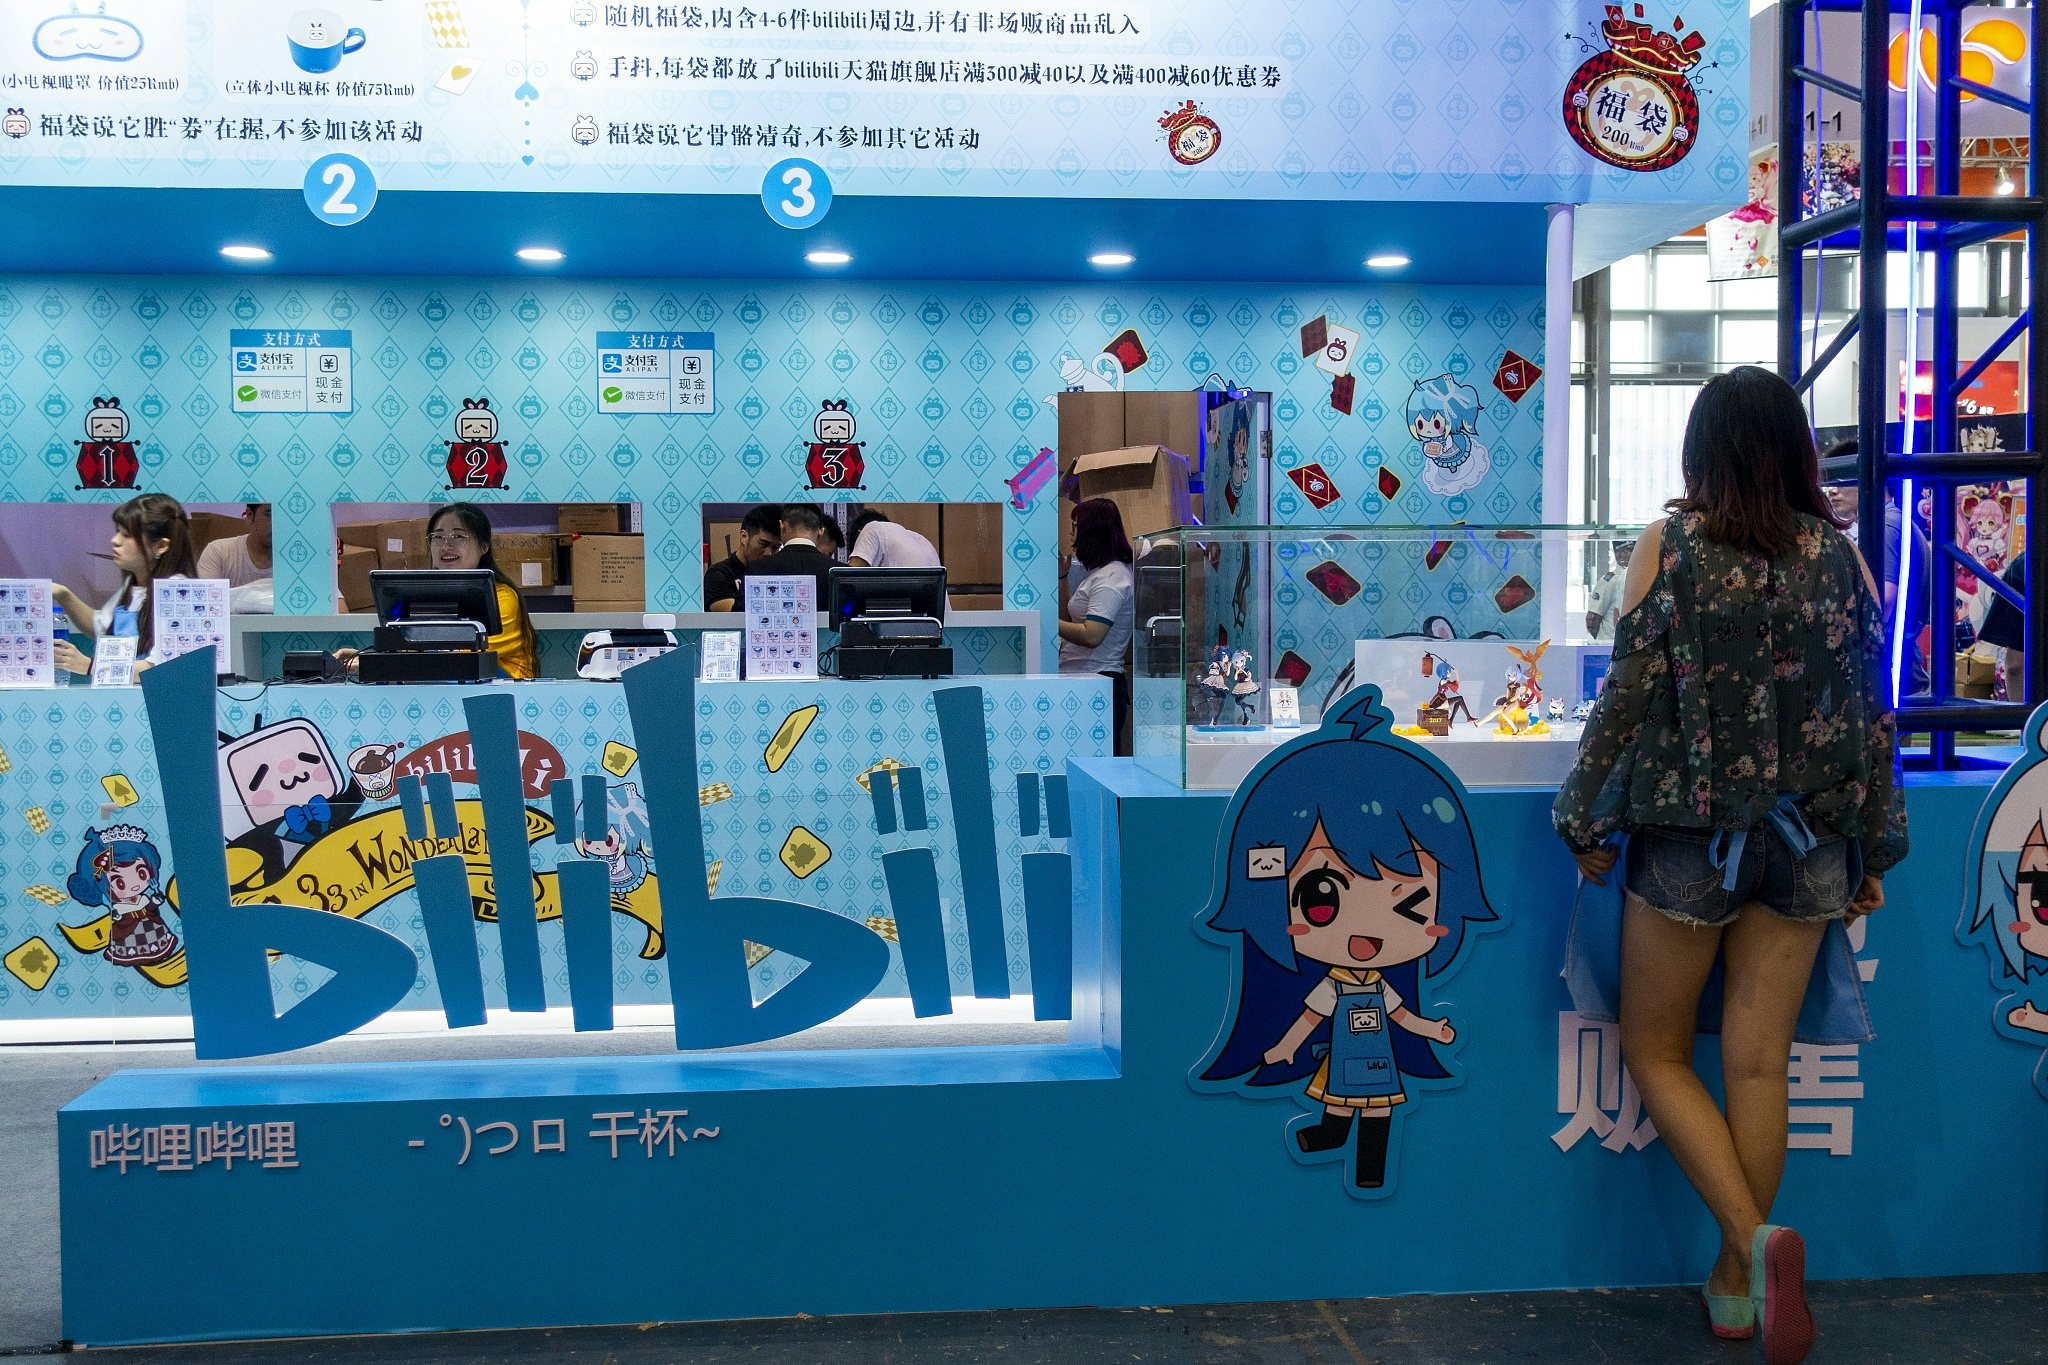 Video streaming site Bilibili teamed up with Alibaba’s online marketplace Taobao, seeking to monopolize on the content-driven e-commerce. Photo: VCG